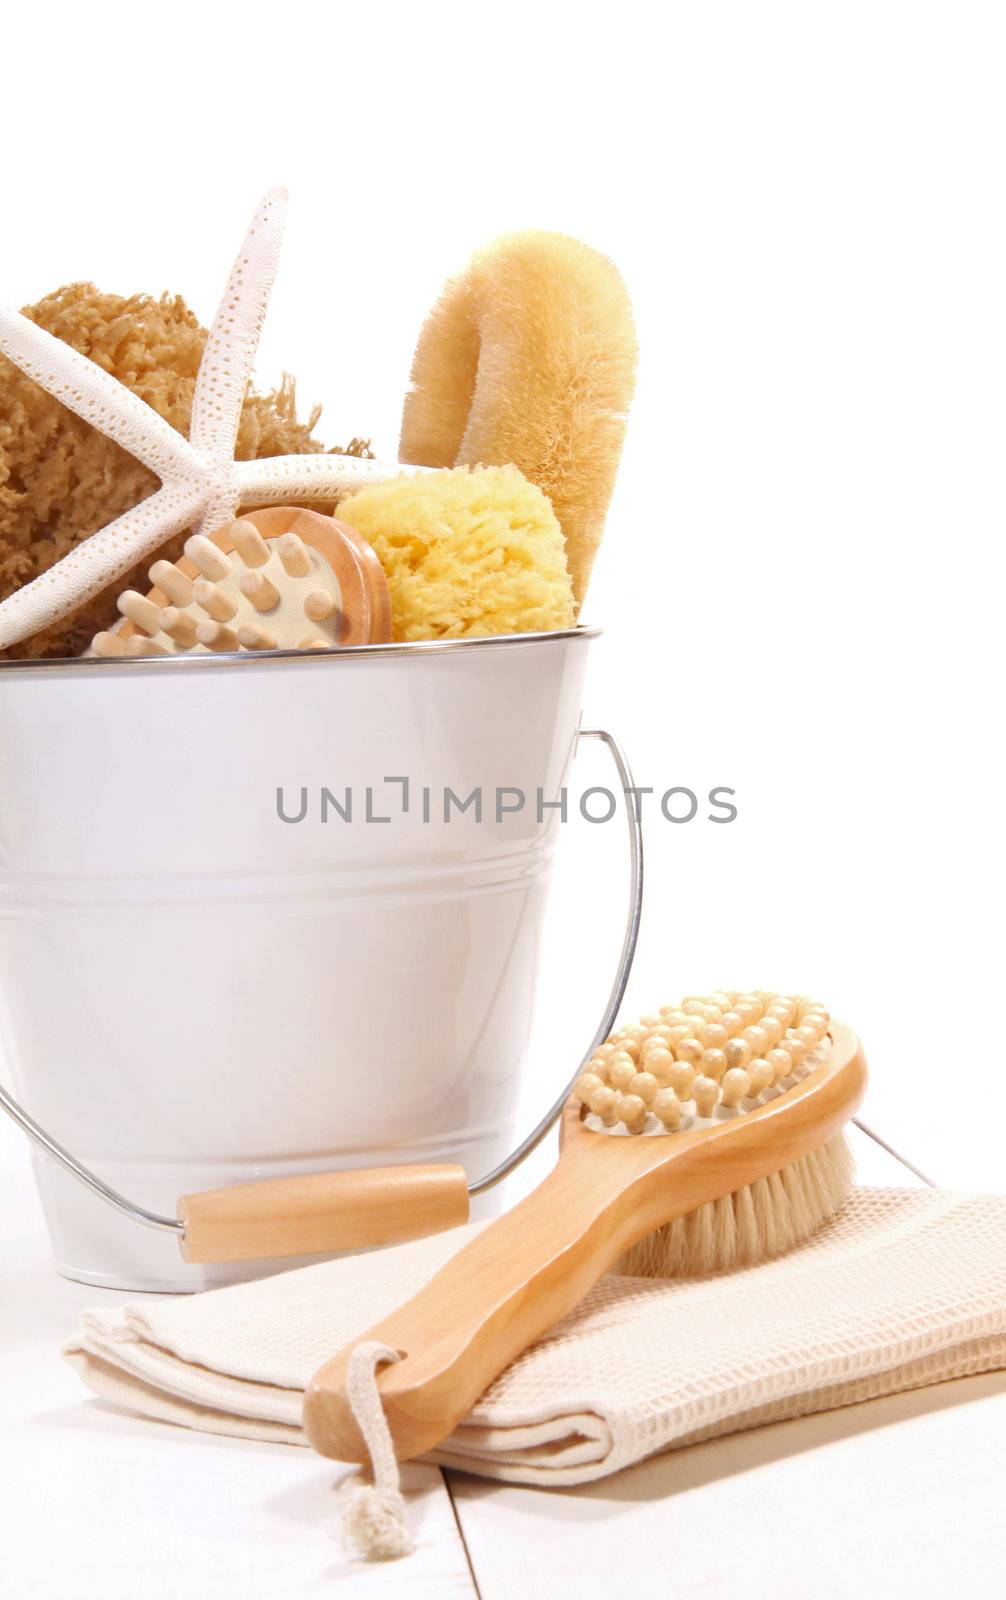 Bucket filled with sponges, scrub brushes and starfish  by Sandralise